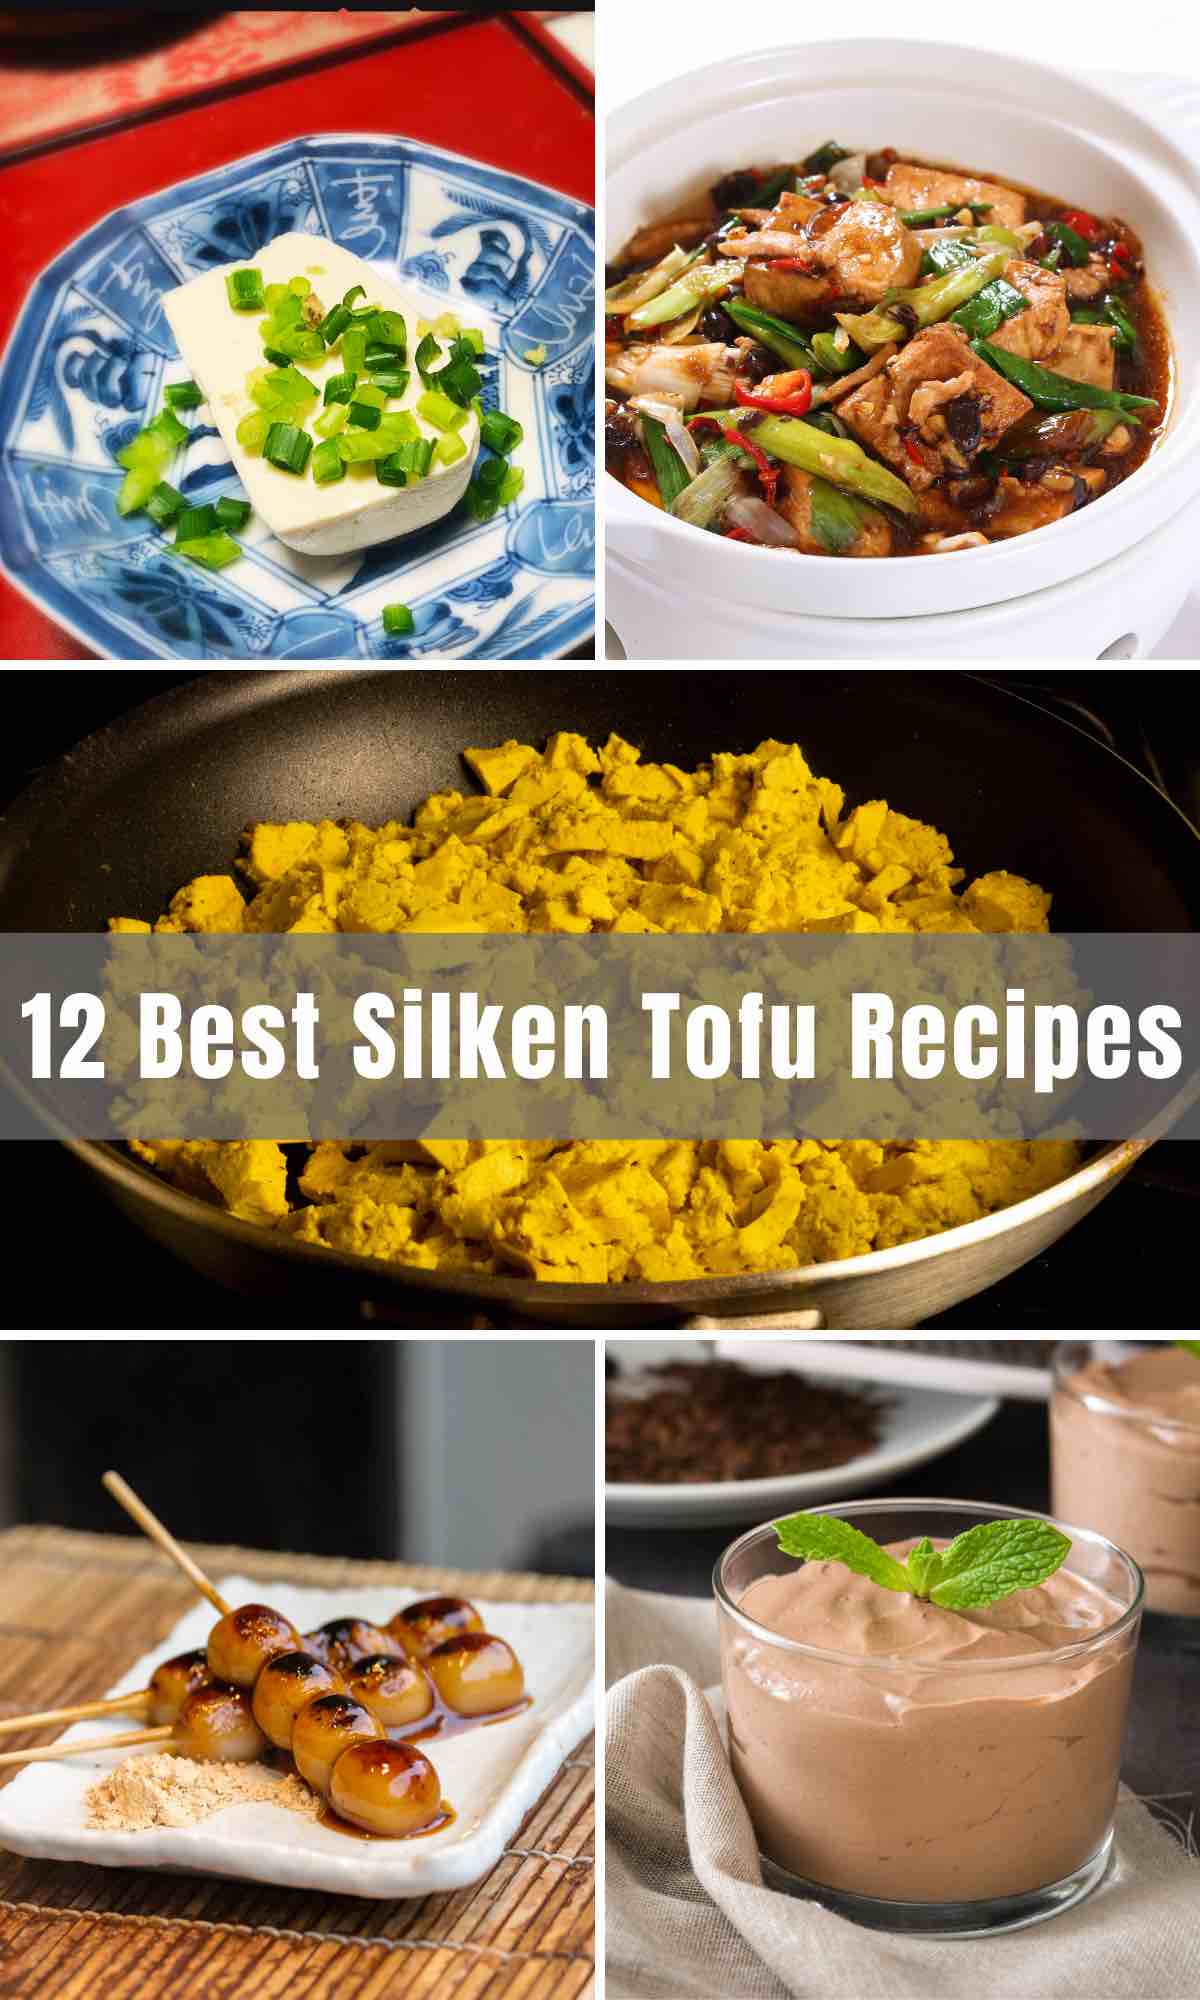 Silken Tofu is healthy, versatile, and delicious. We've collected 12 Best Silken Tofu Recipes, from scrambled to braised, broiled, stir-fried - even desserts made of silken tofu!